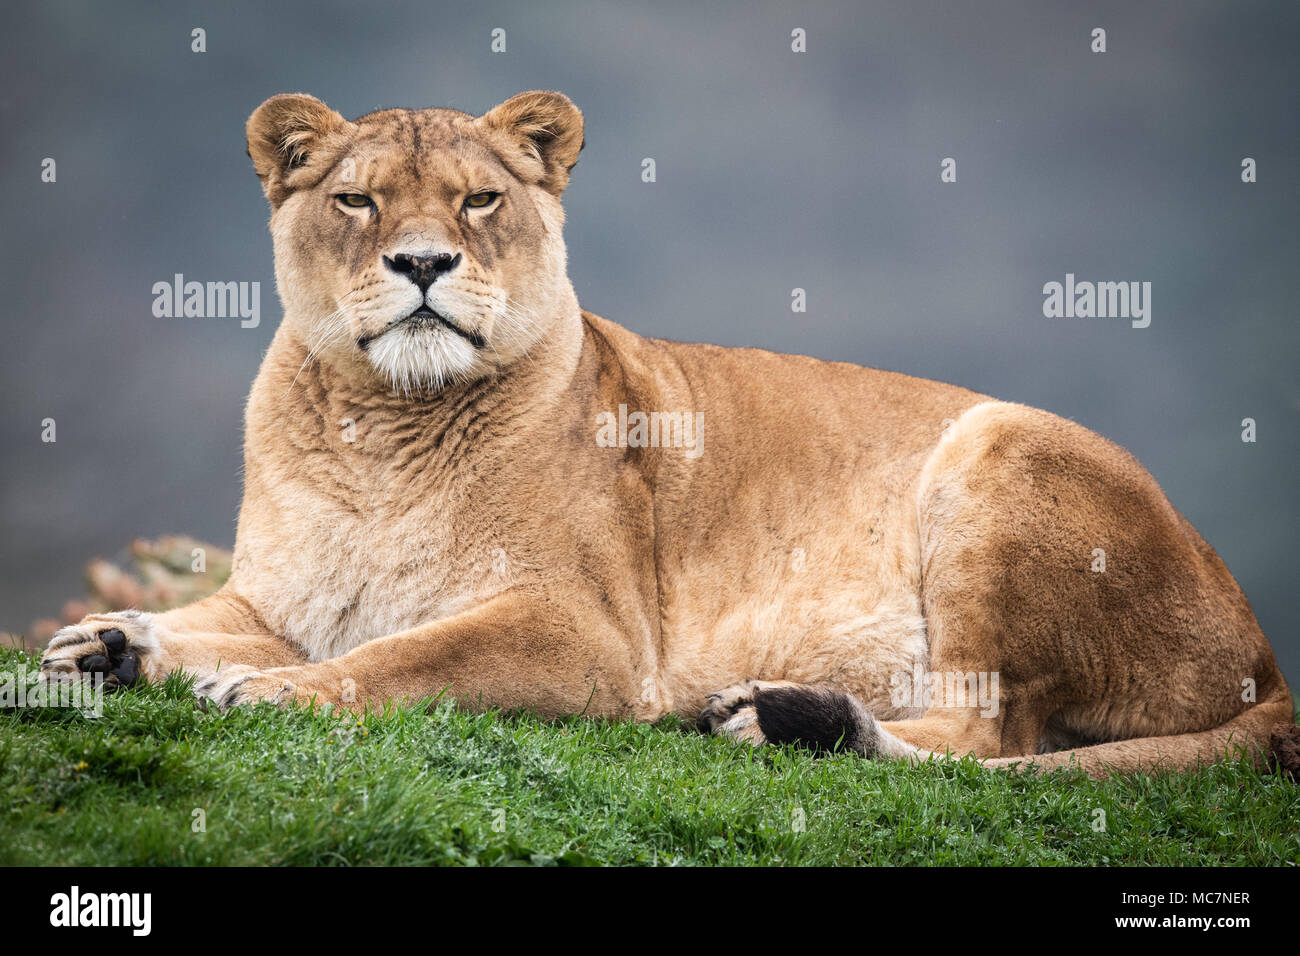 Lioness full body observing the viewer Stock Photo